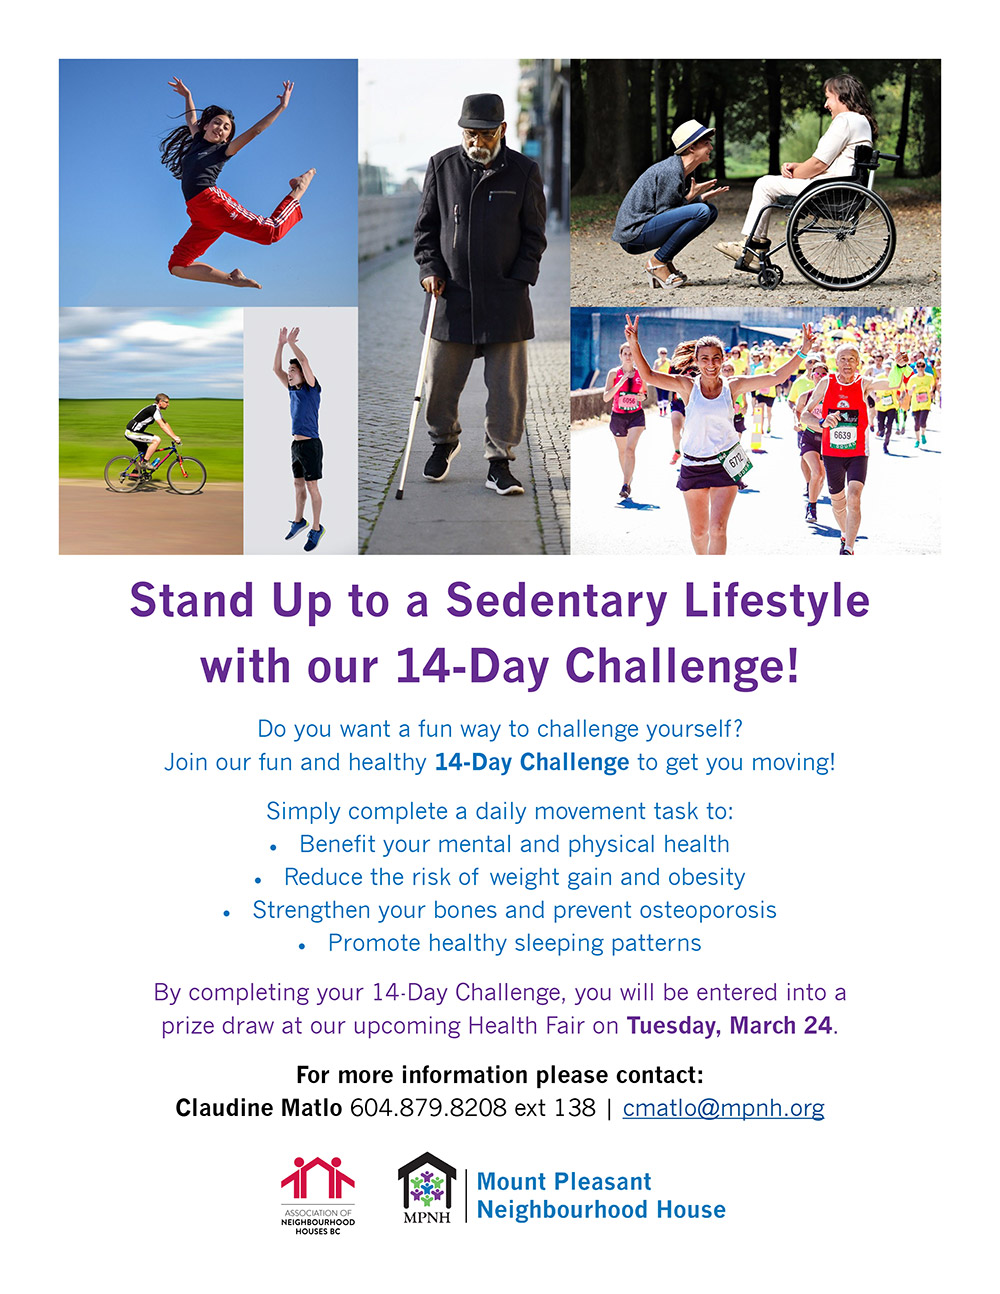 Poster for the 14-Day Challenge showing lots of people of all ages and abilities getting active